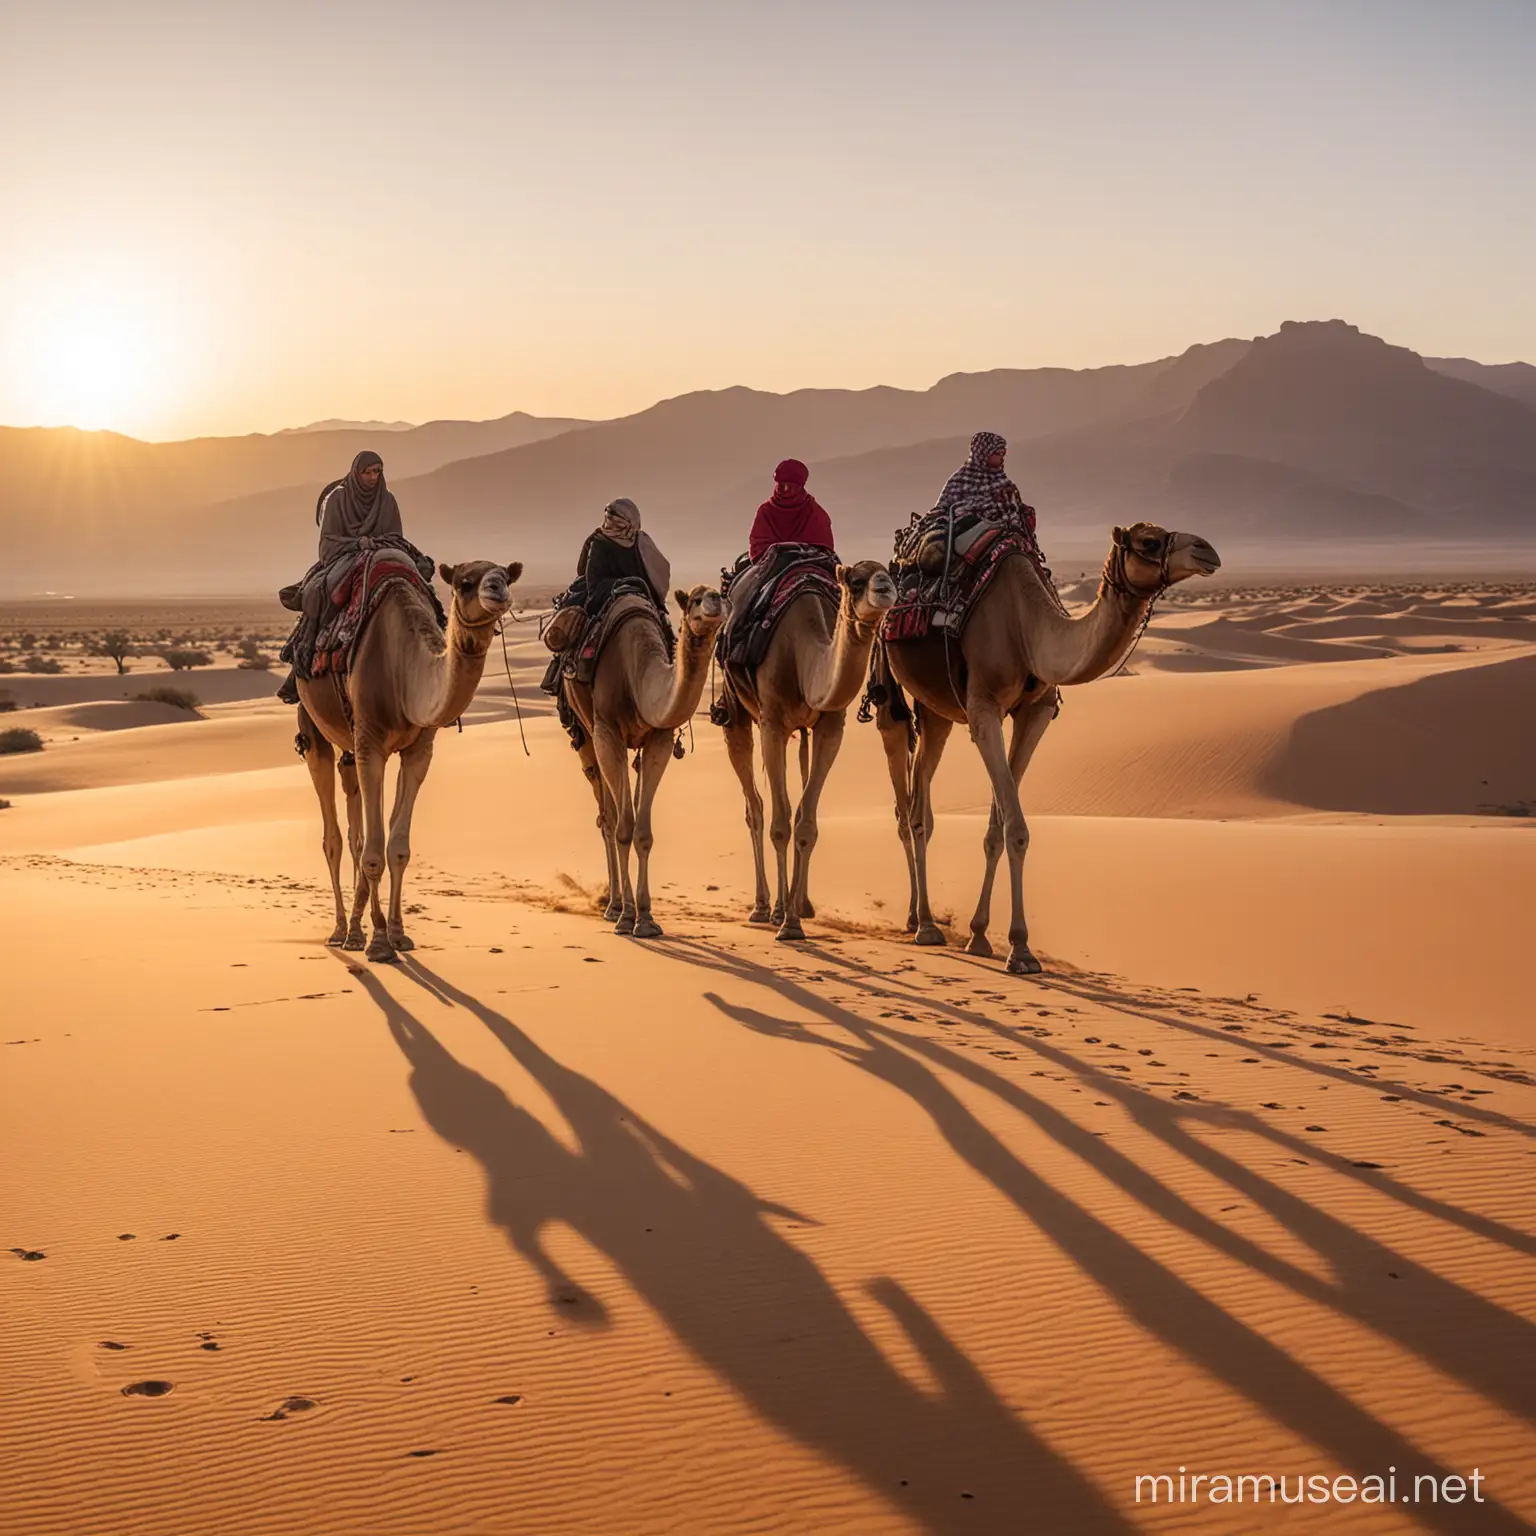 A few nomad peop,e are walking trouvh the desert full wide body portrait with two camels by sunset light 24mm fuji xt3 soft light and co ntrast detailted foto realistisch